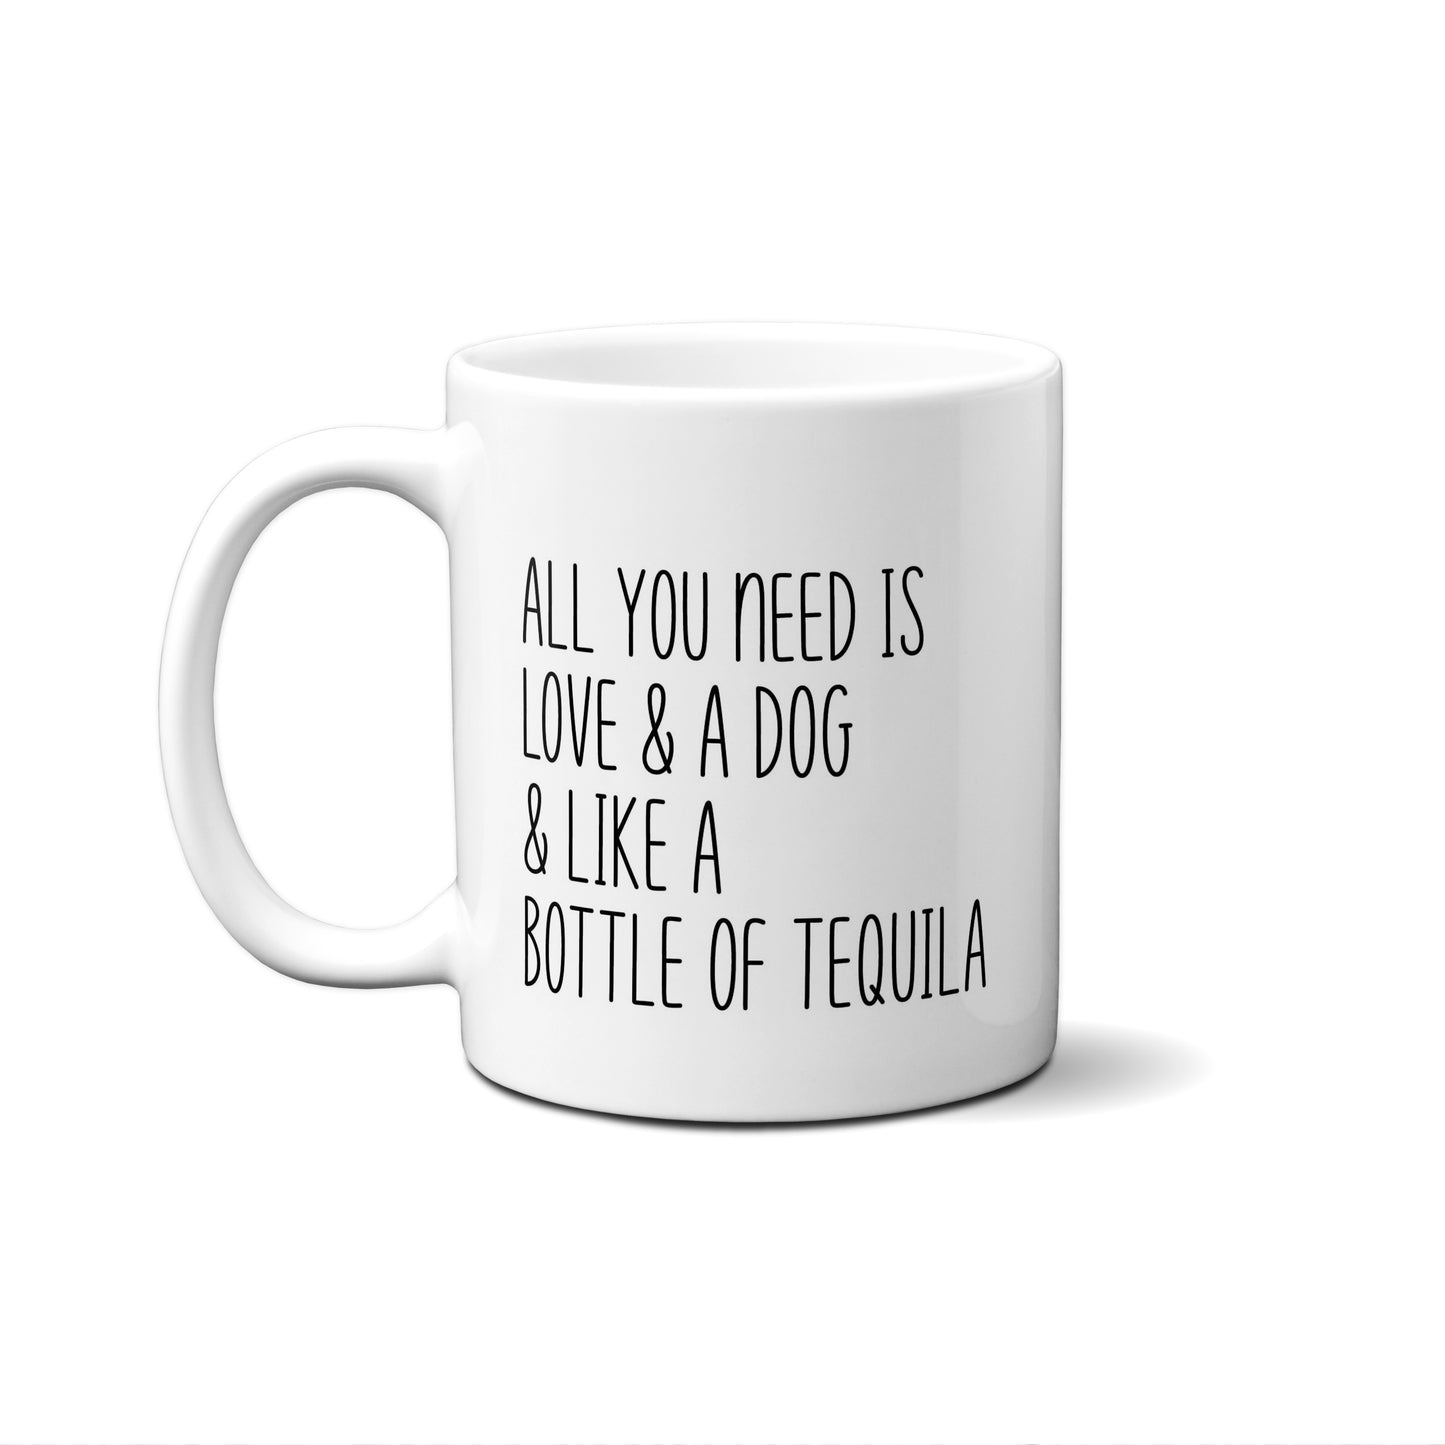 All You Need Is Love & A Dog & Like A Bottle Of Tequila Quote Mug